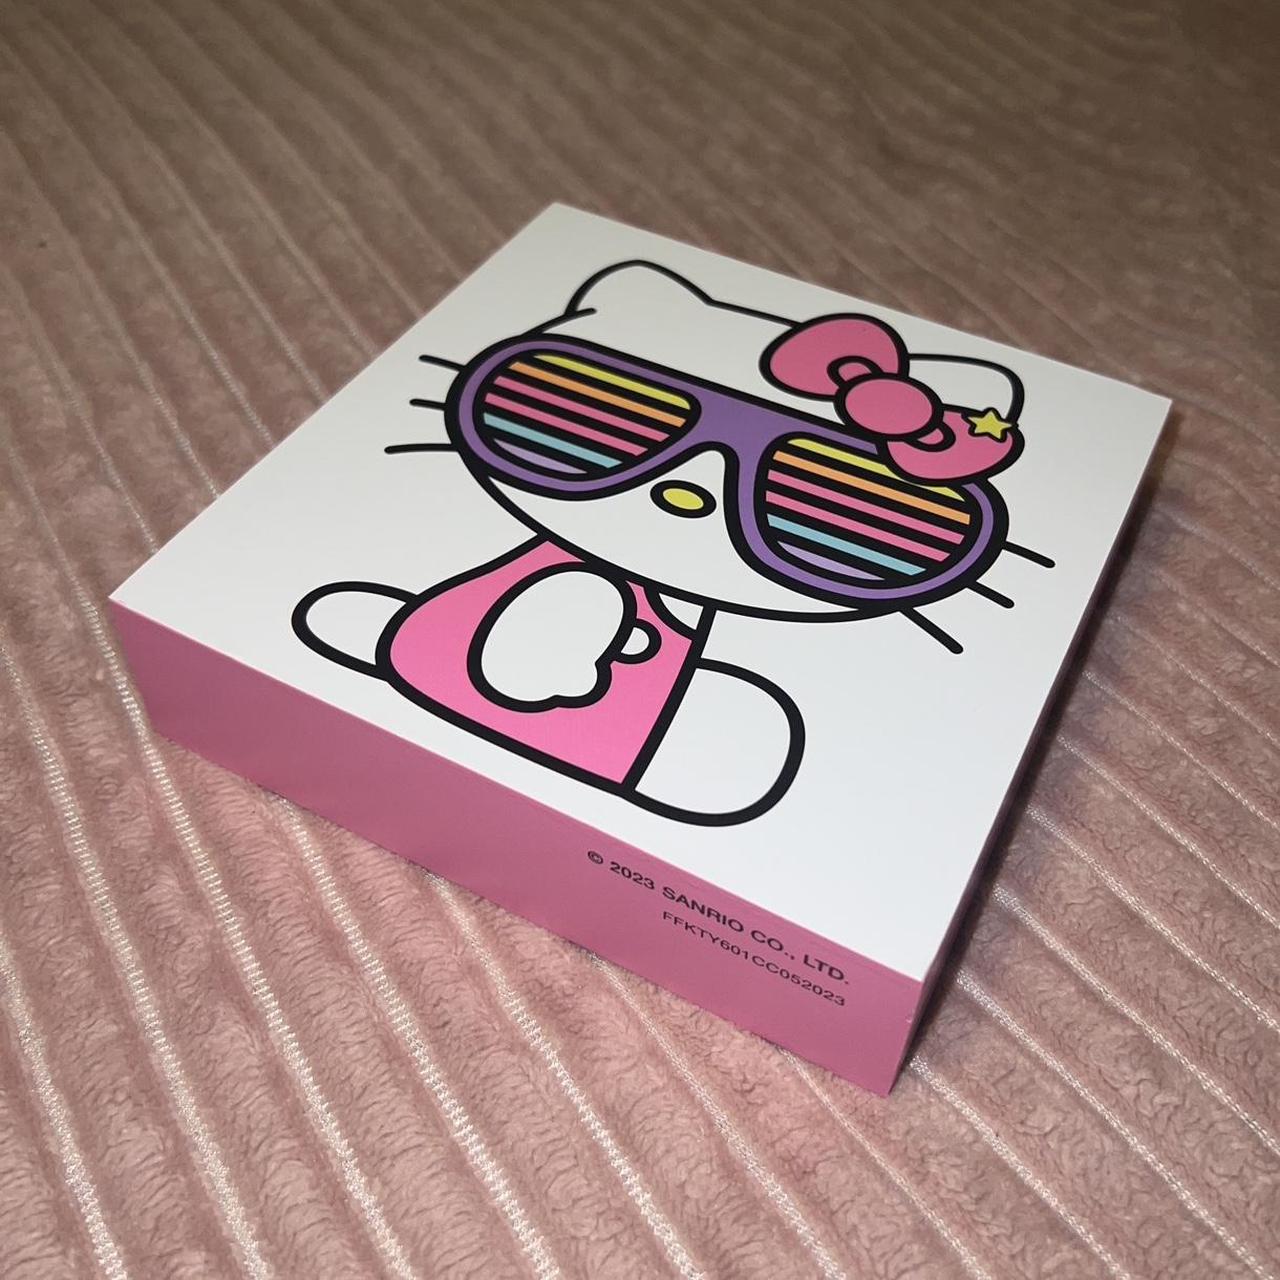 Hello kitty wall decor ♡︎ Packaged with extra love - Depop